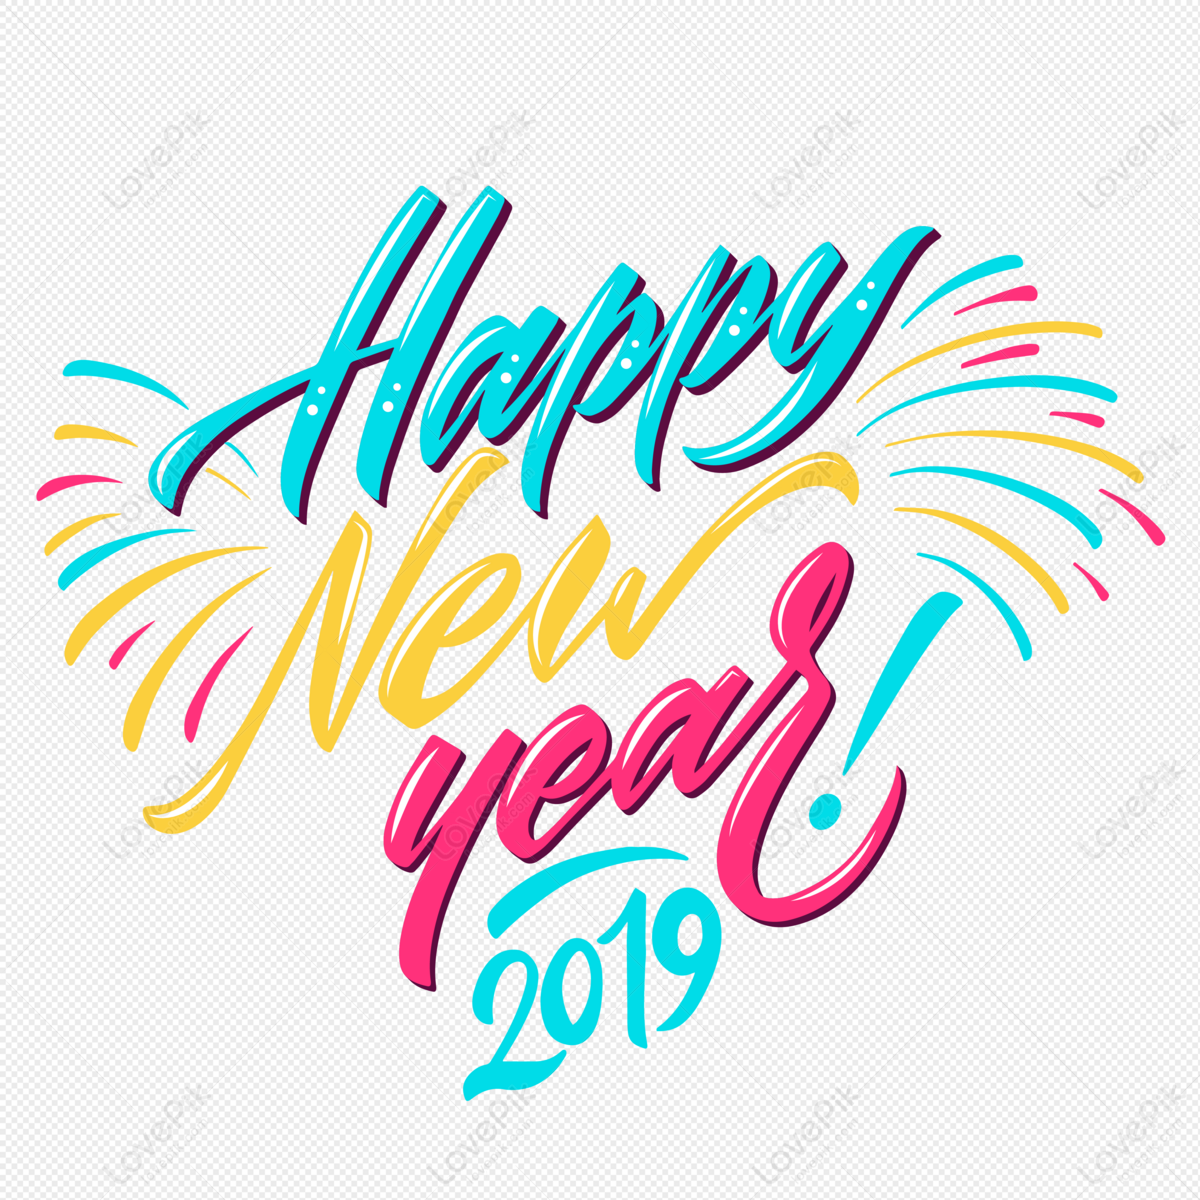 Happy New Year Love Images